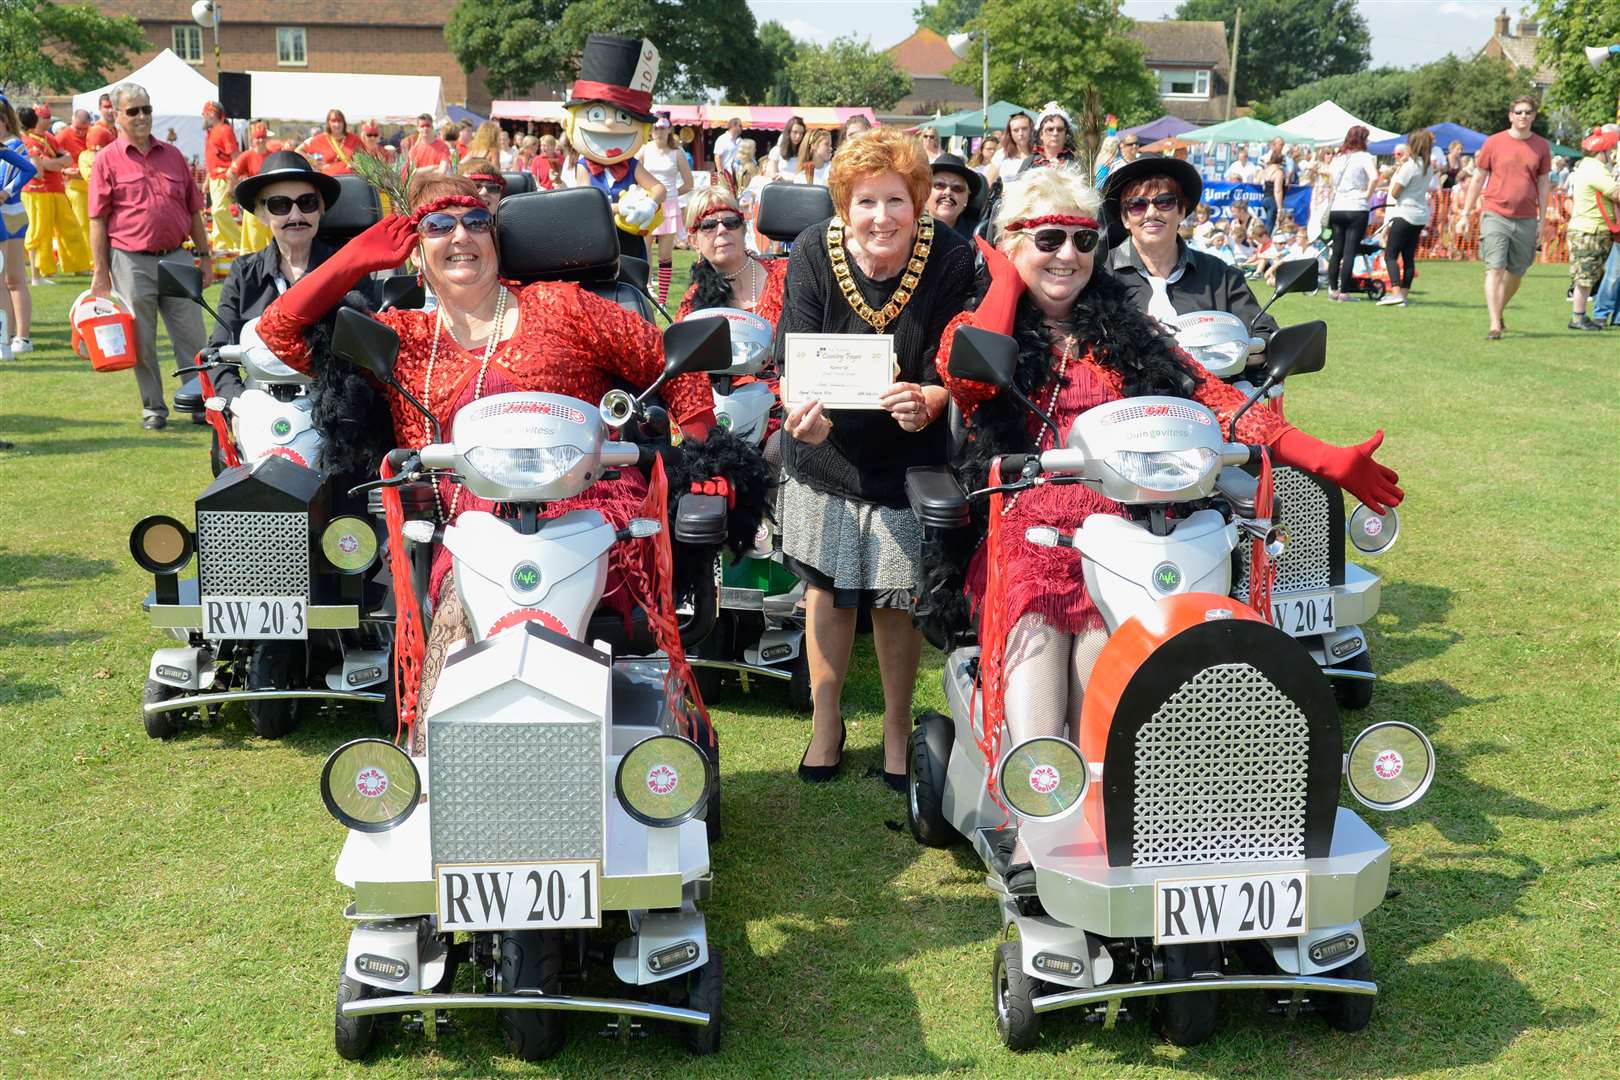 A scene from last year's New Romney Country Fayre.